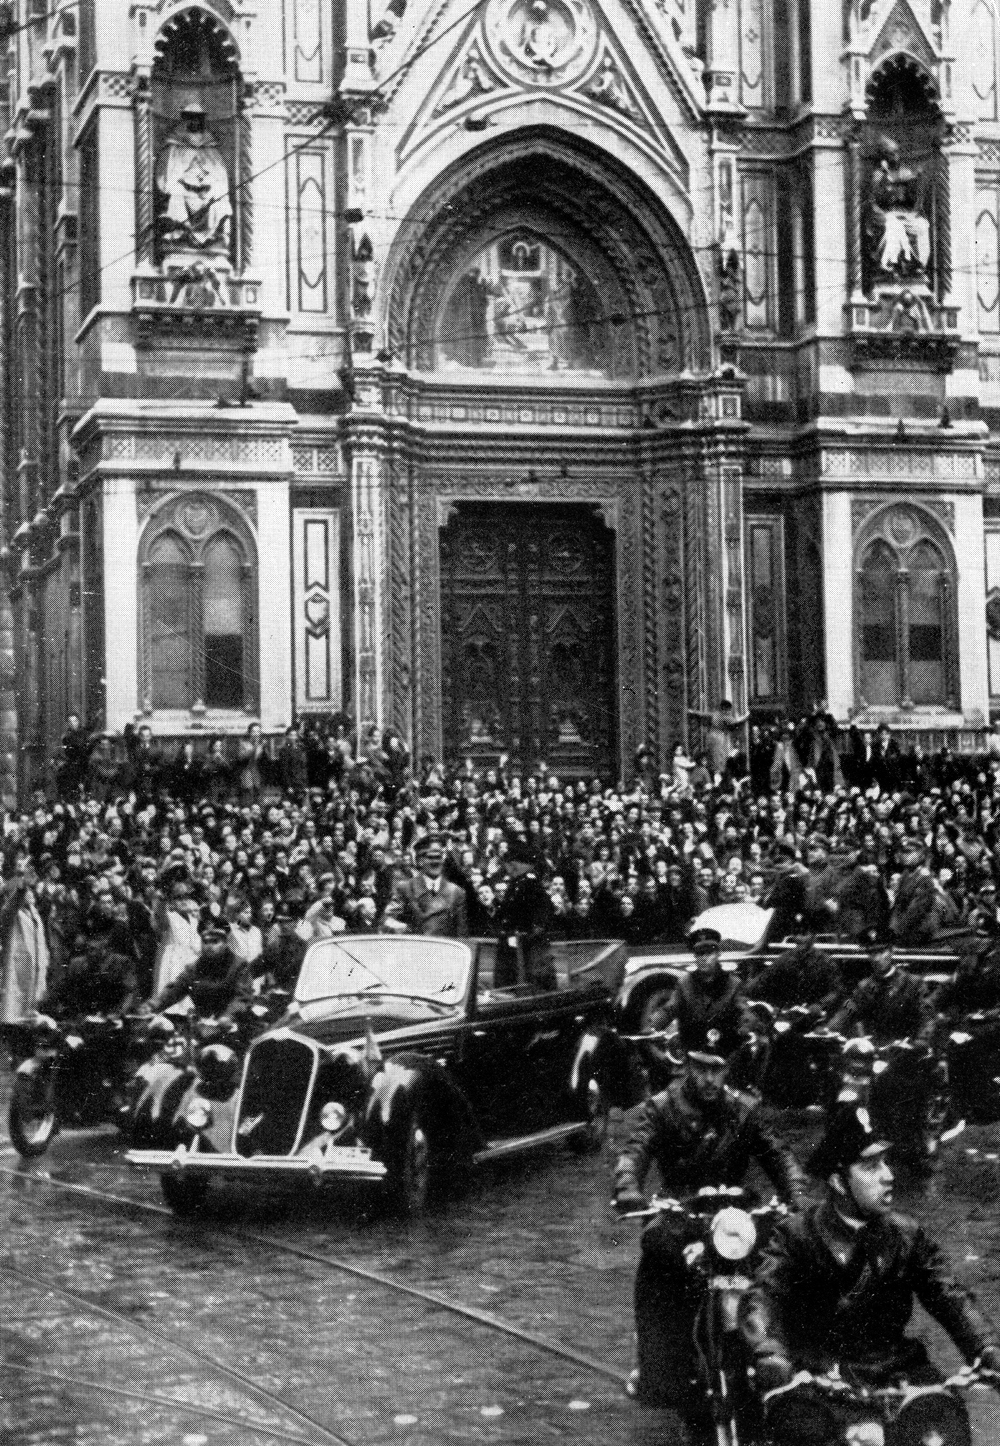 Adolf Hitler and Benito Mussolini are welcomed by the crowd in front of the cathedral of Florence